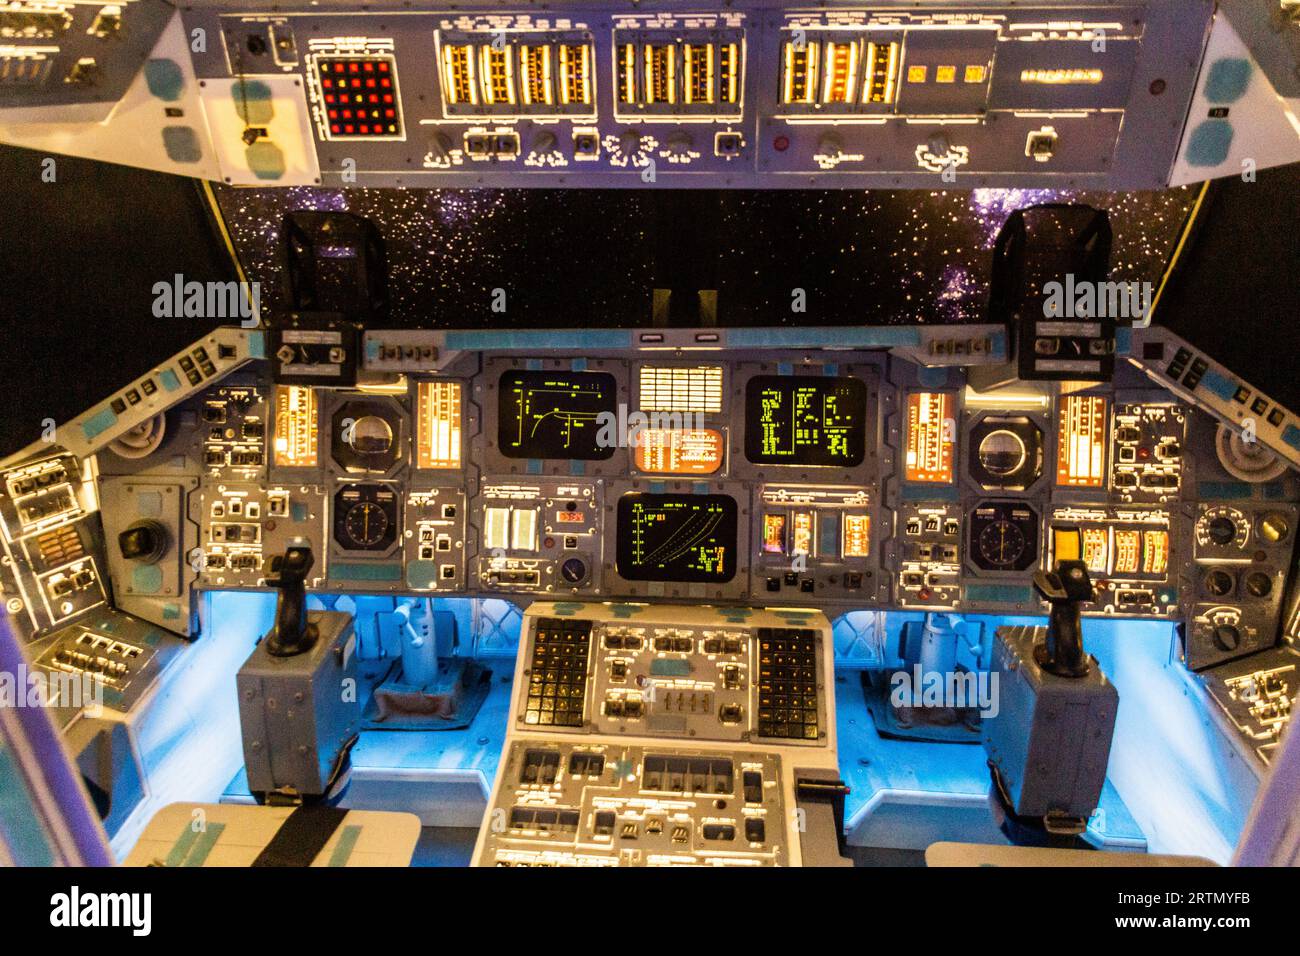 PRAGUE, CZECHIA - JULY 10, 2020: Space Shuttle cockpit model at Cosmos Discovery Space Exhibition in Prague, Czech Republic Stock Photo